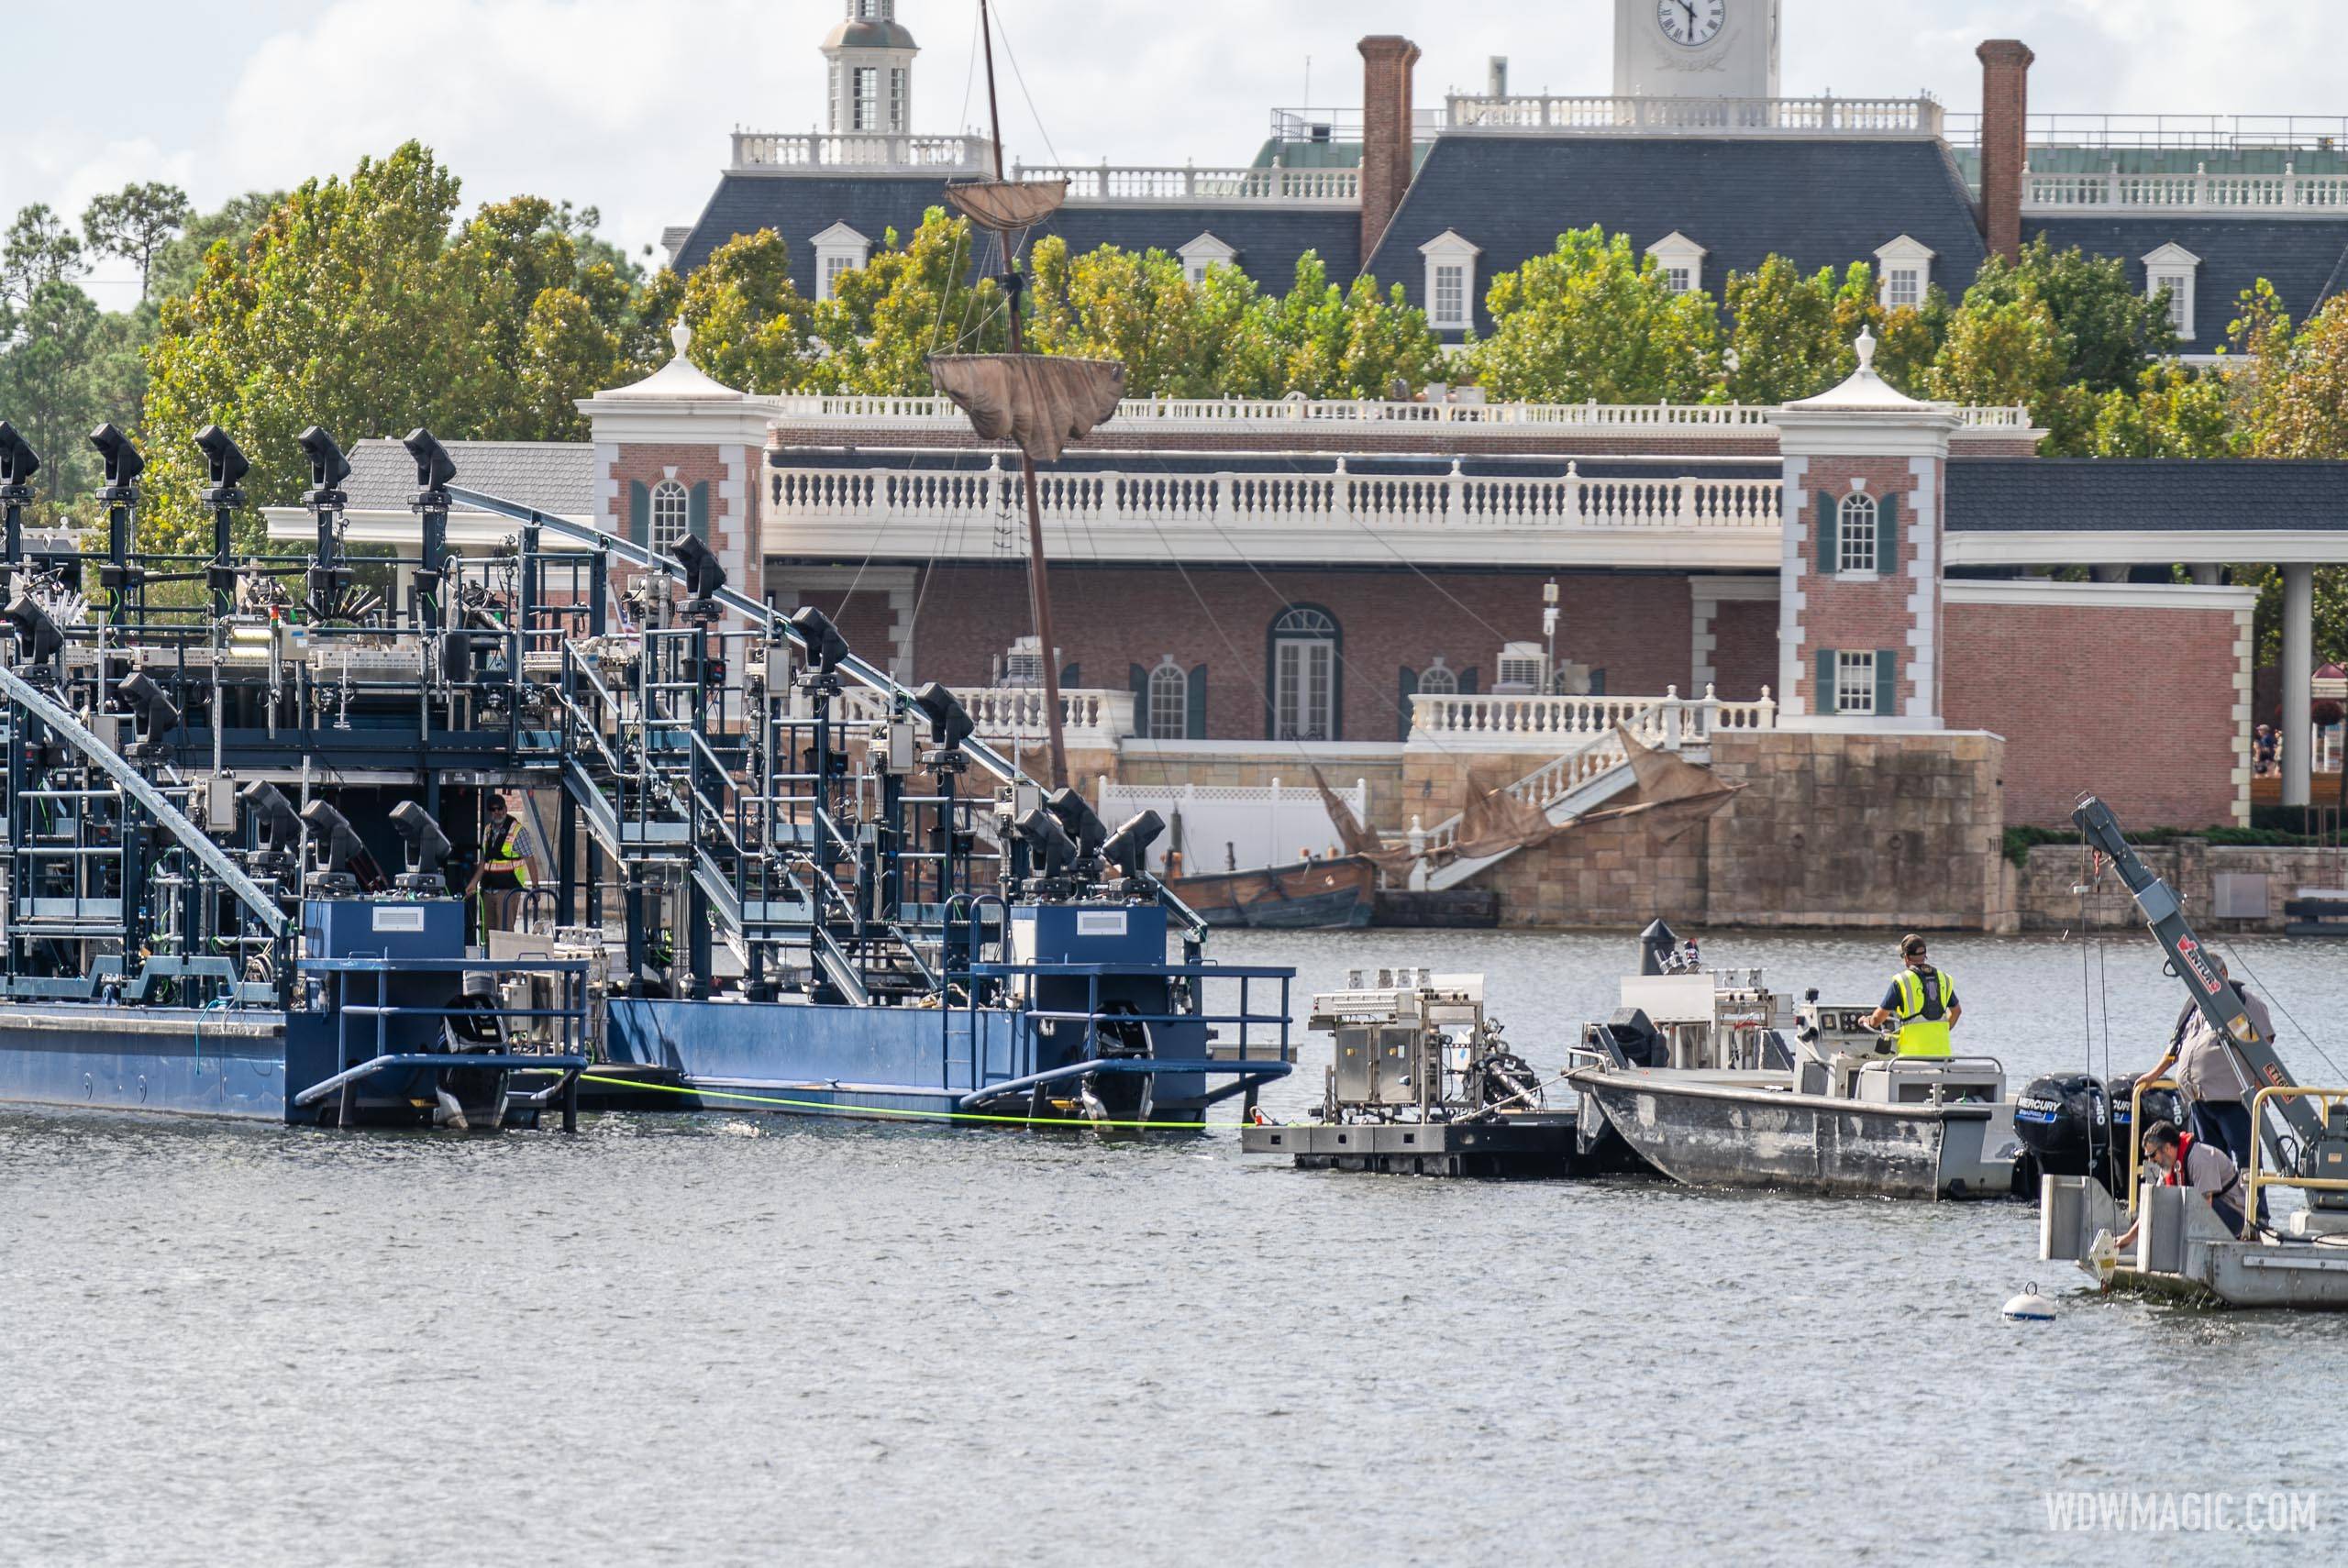 First look at the new Luminous mini-barges deployed in World Showcase lagoon